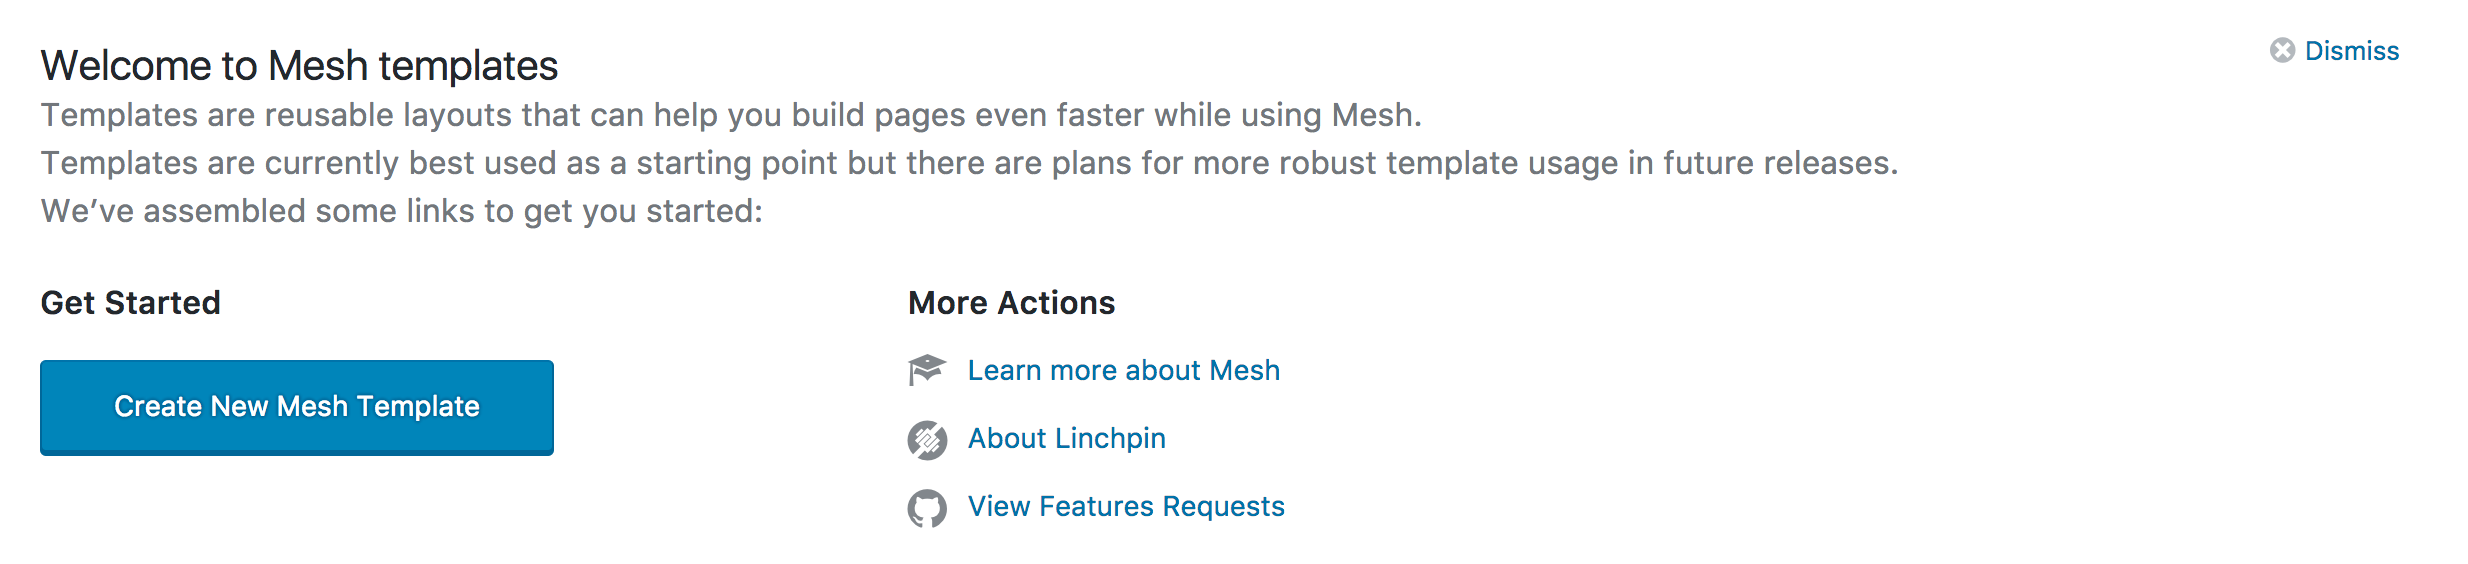 A quick welcome message when visiting Mesh Templates for the first time.